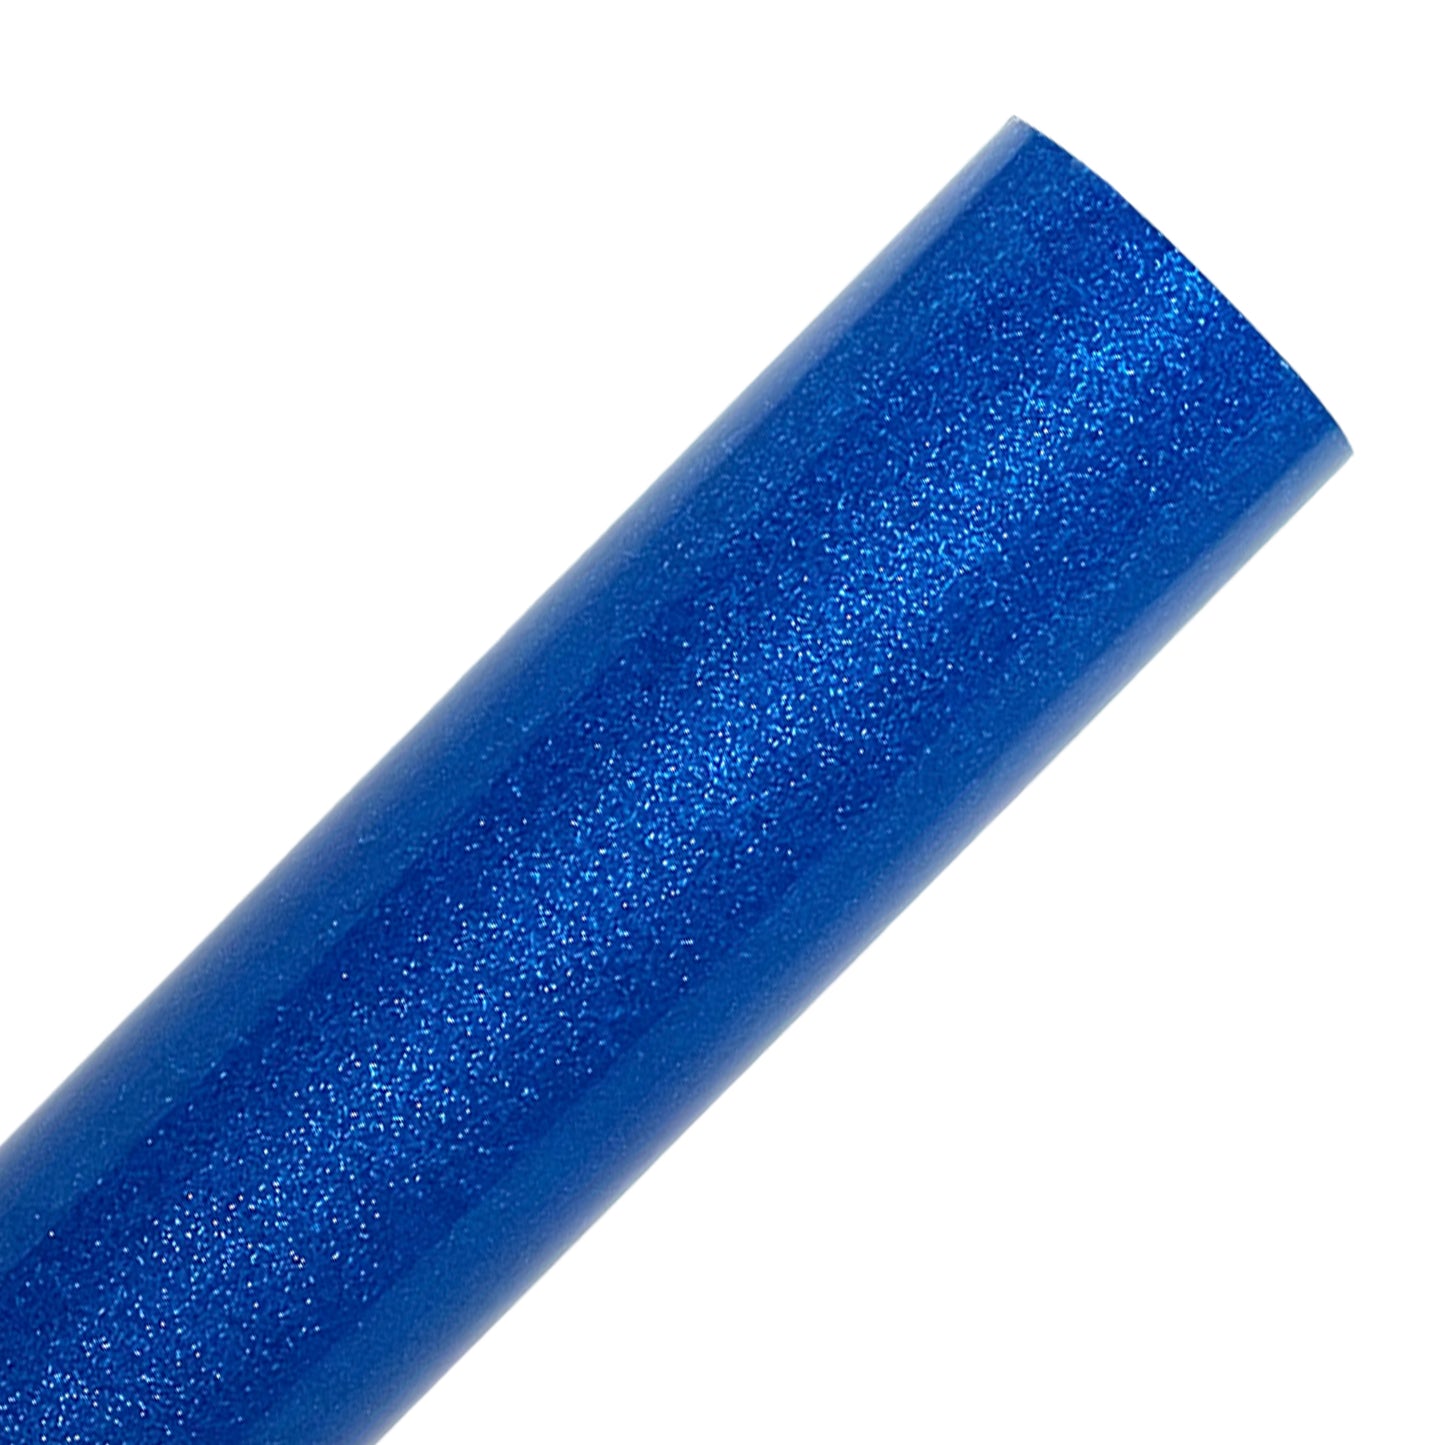 Blue Transparent Glitter Adhesive Vinyl Sheets By Craftables